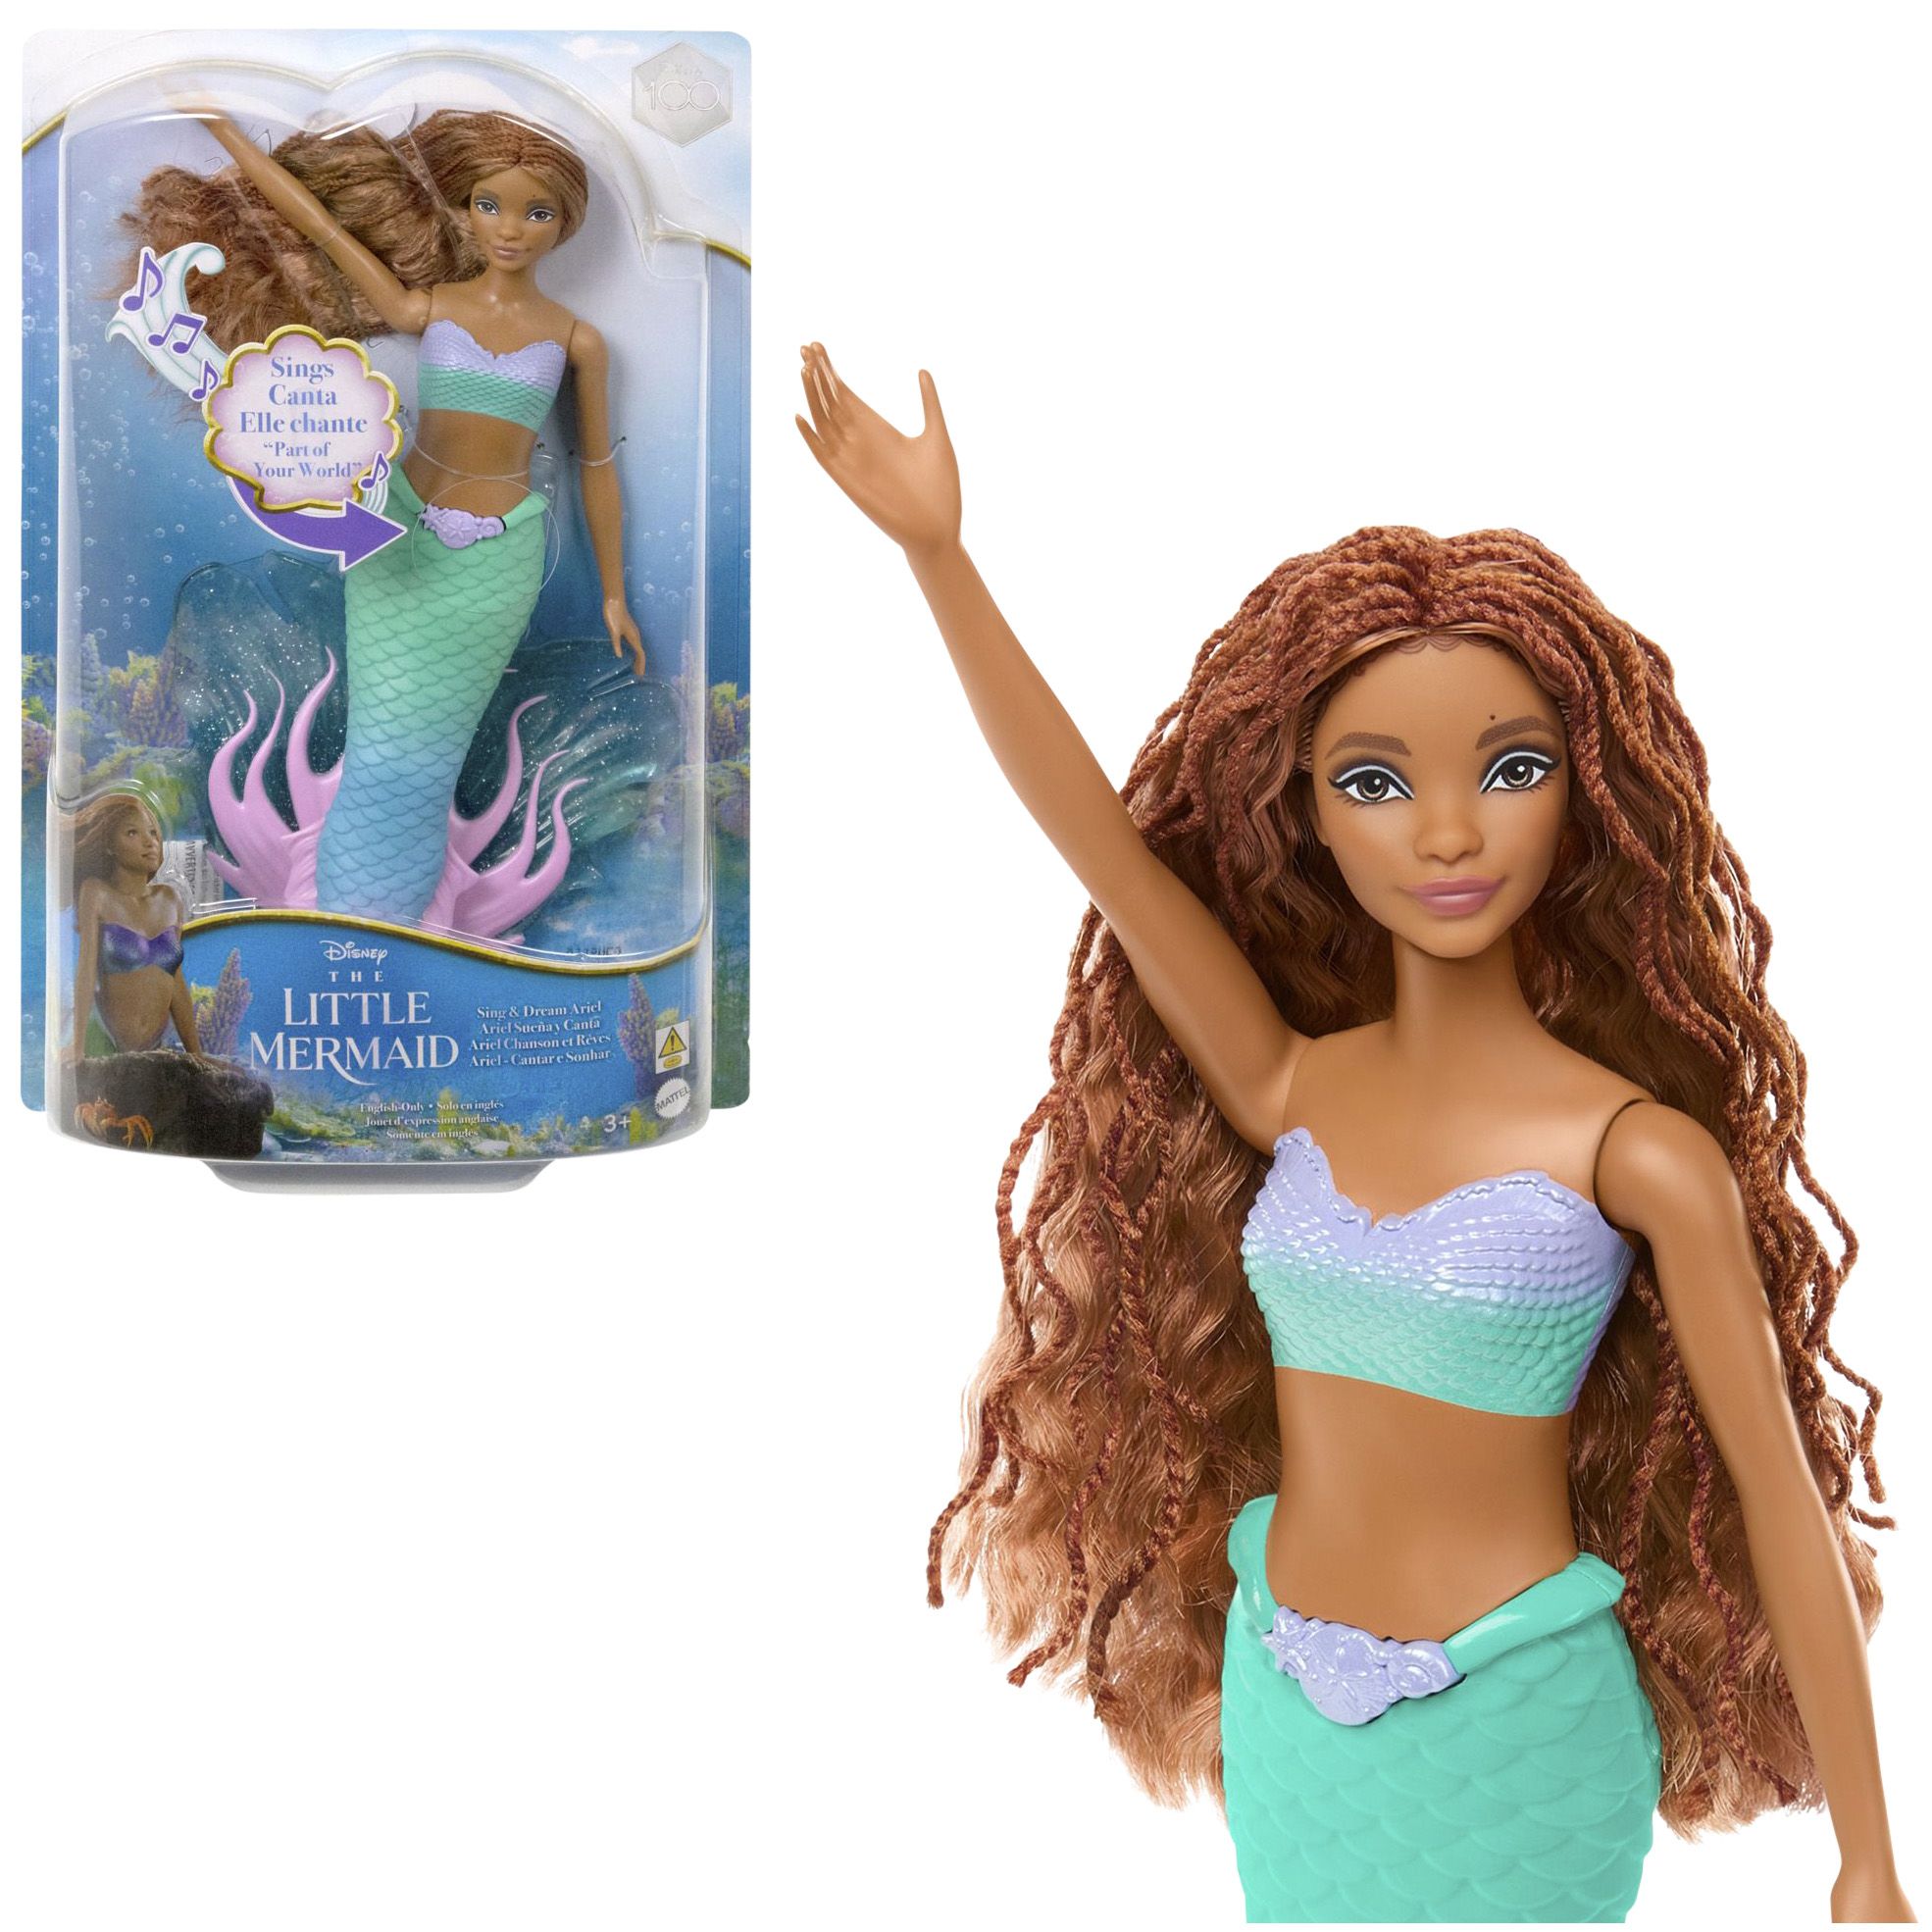 Mermaid Play Set Hand Sewing Kit - A Child's Dream